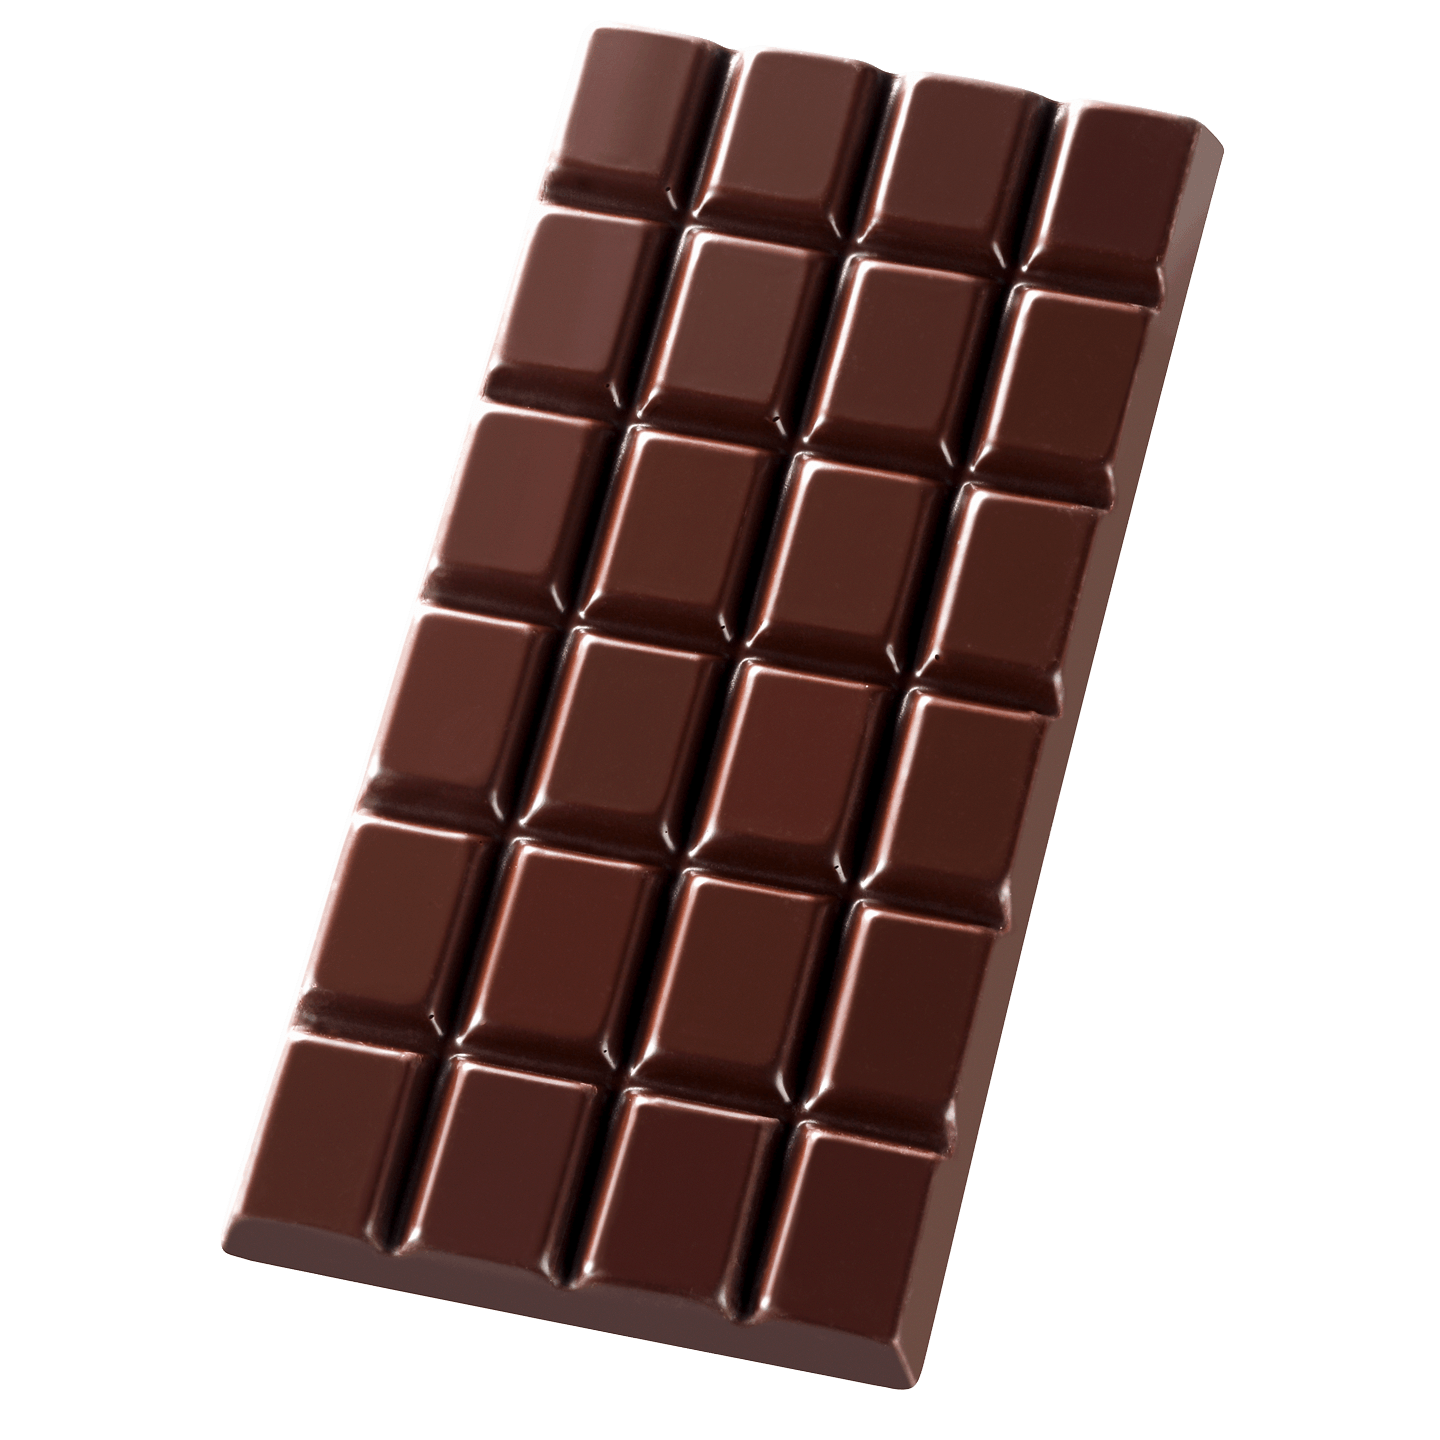 Donkere chocolade PNG Beeld achtergrond